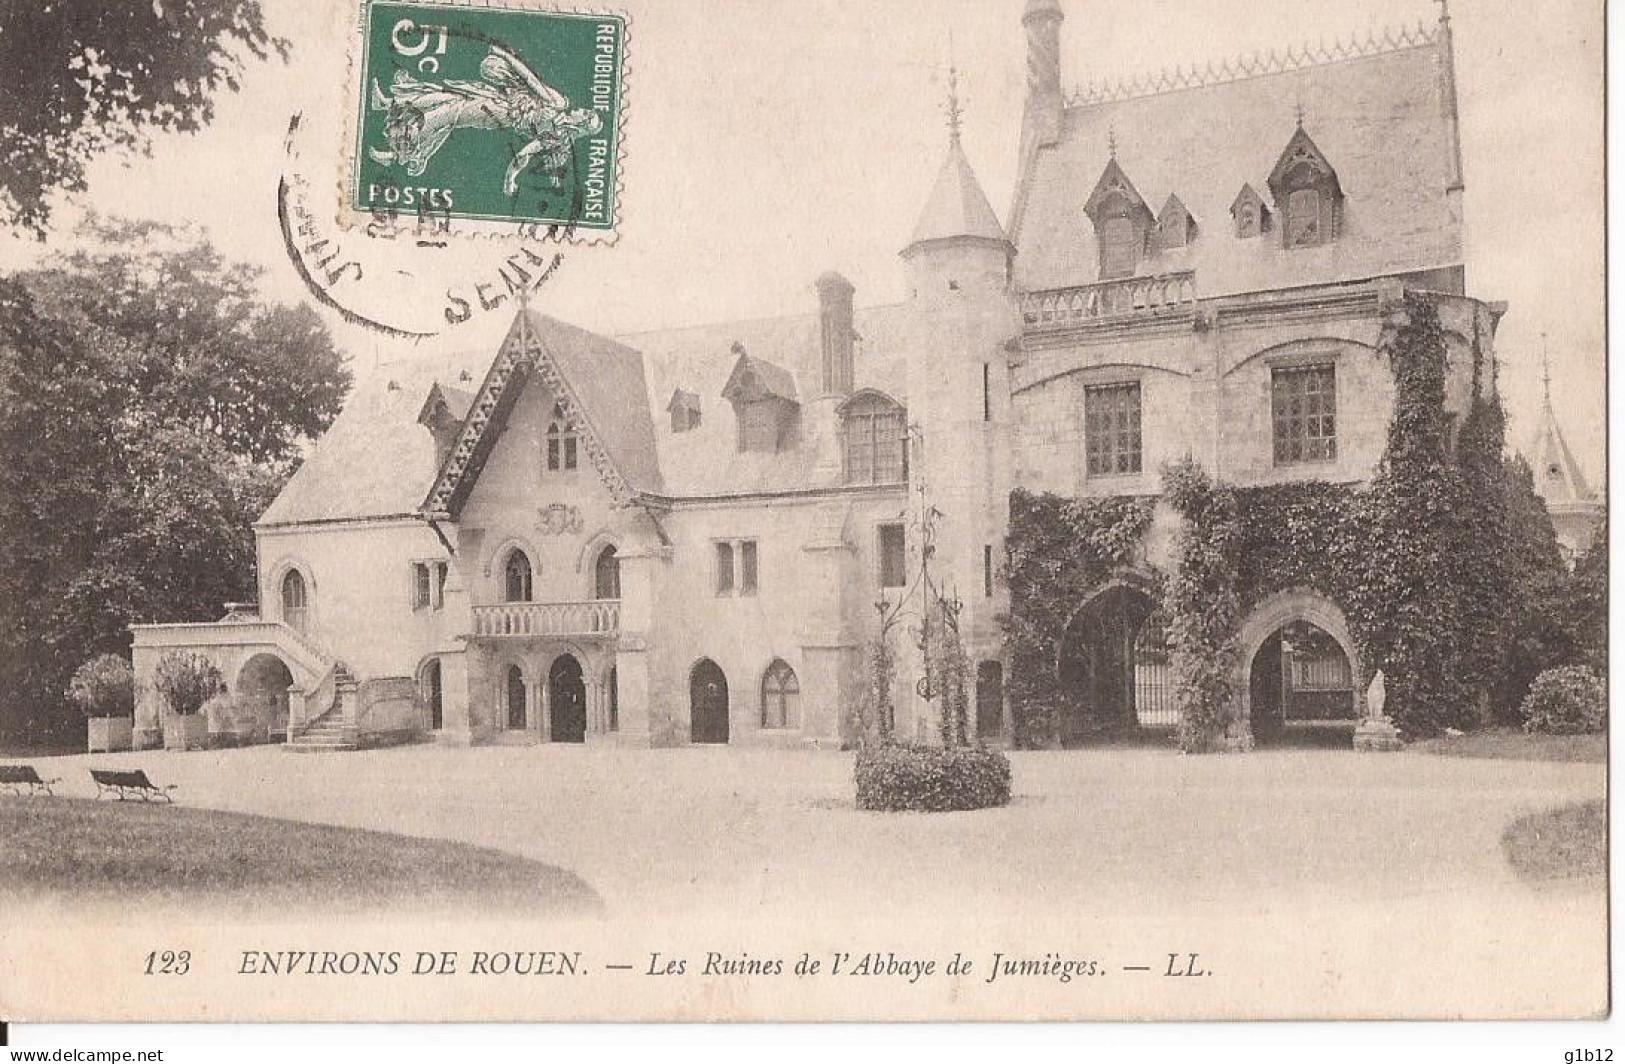 JUMIEGES - ANCIENNE ABBAYE - 3 CARTES - Jumieges